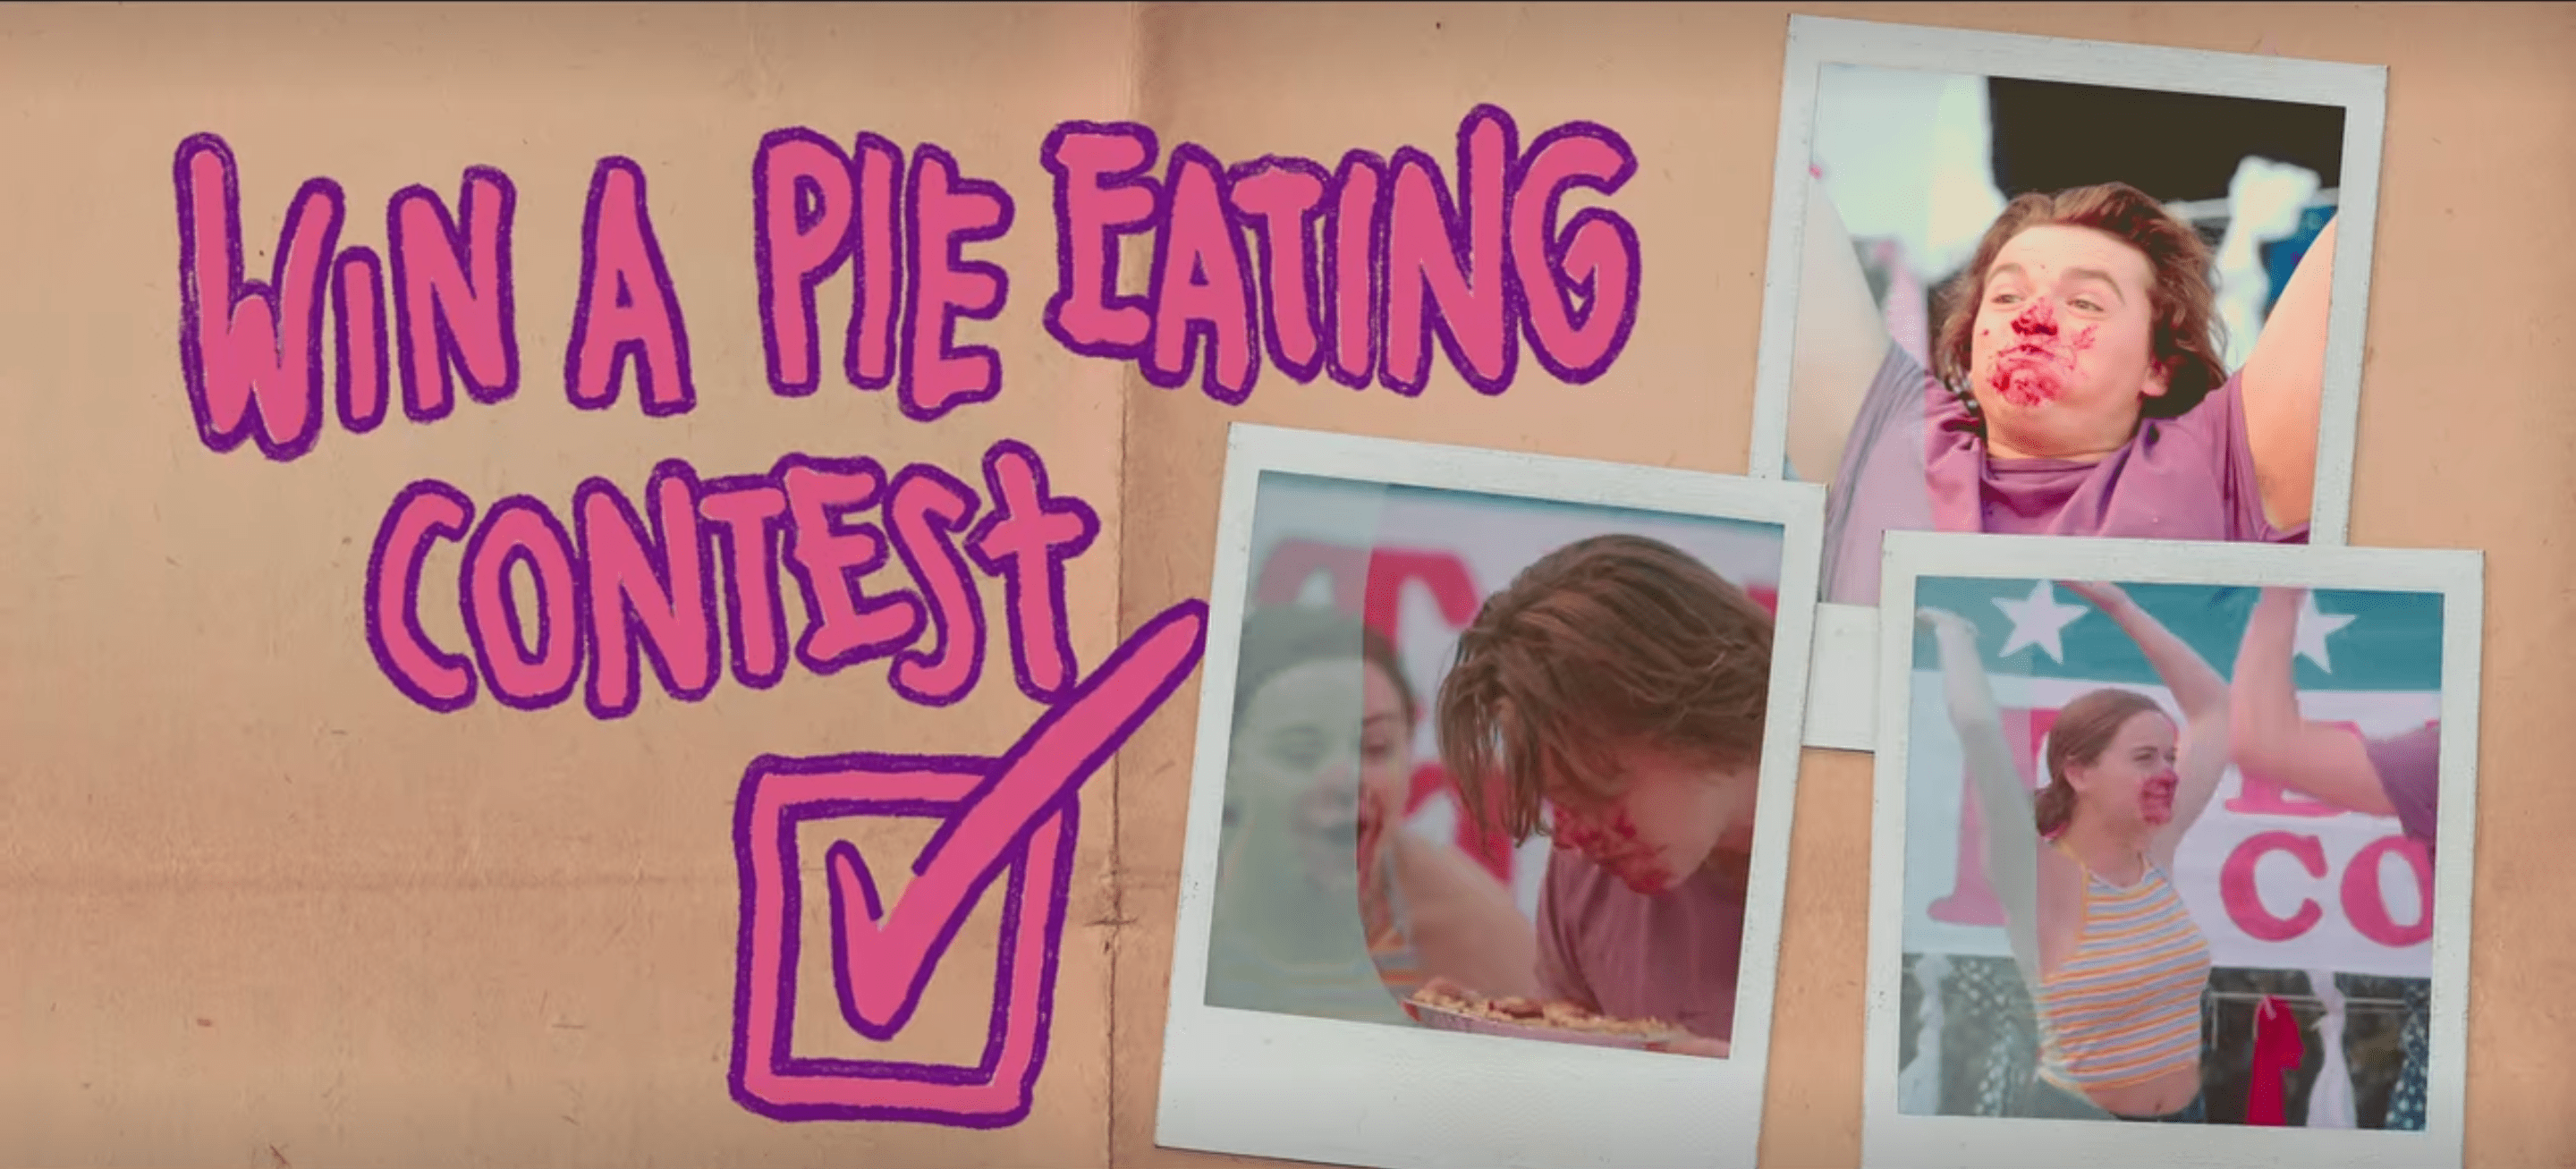 Graphic letters saying Win a pie eating contest with a box and check mark next to several polaroids of Elle and Lee compet